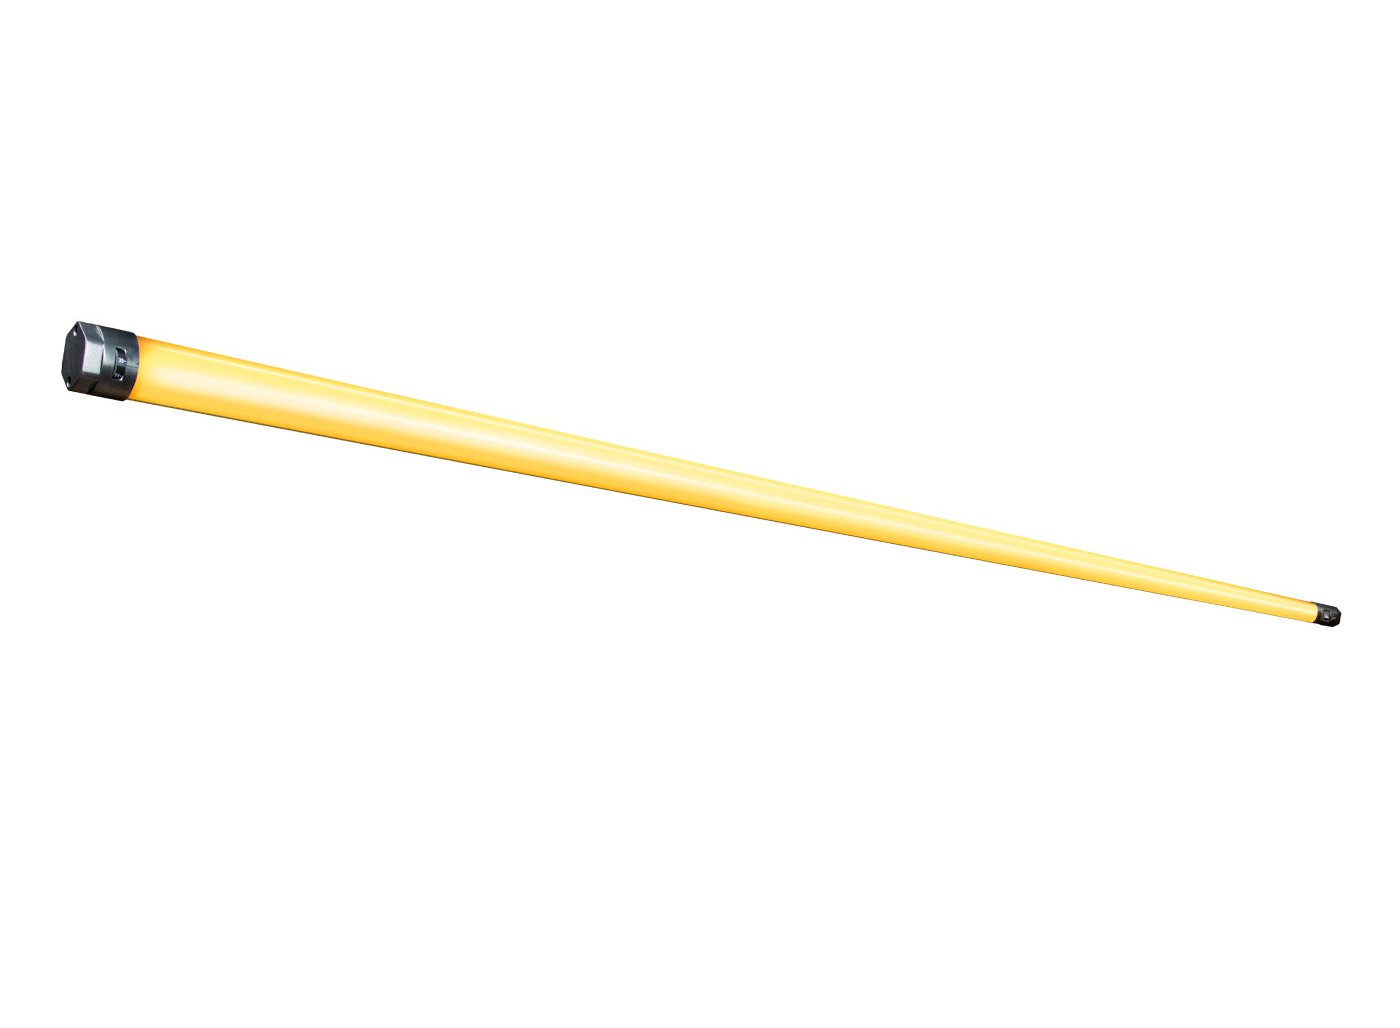 Quasar Science X 8FT Linear LED Tube With A Bi-color Range Of 2000-6000K | Full Compass Systems